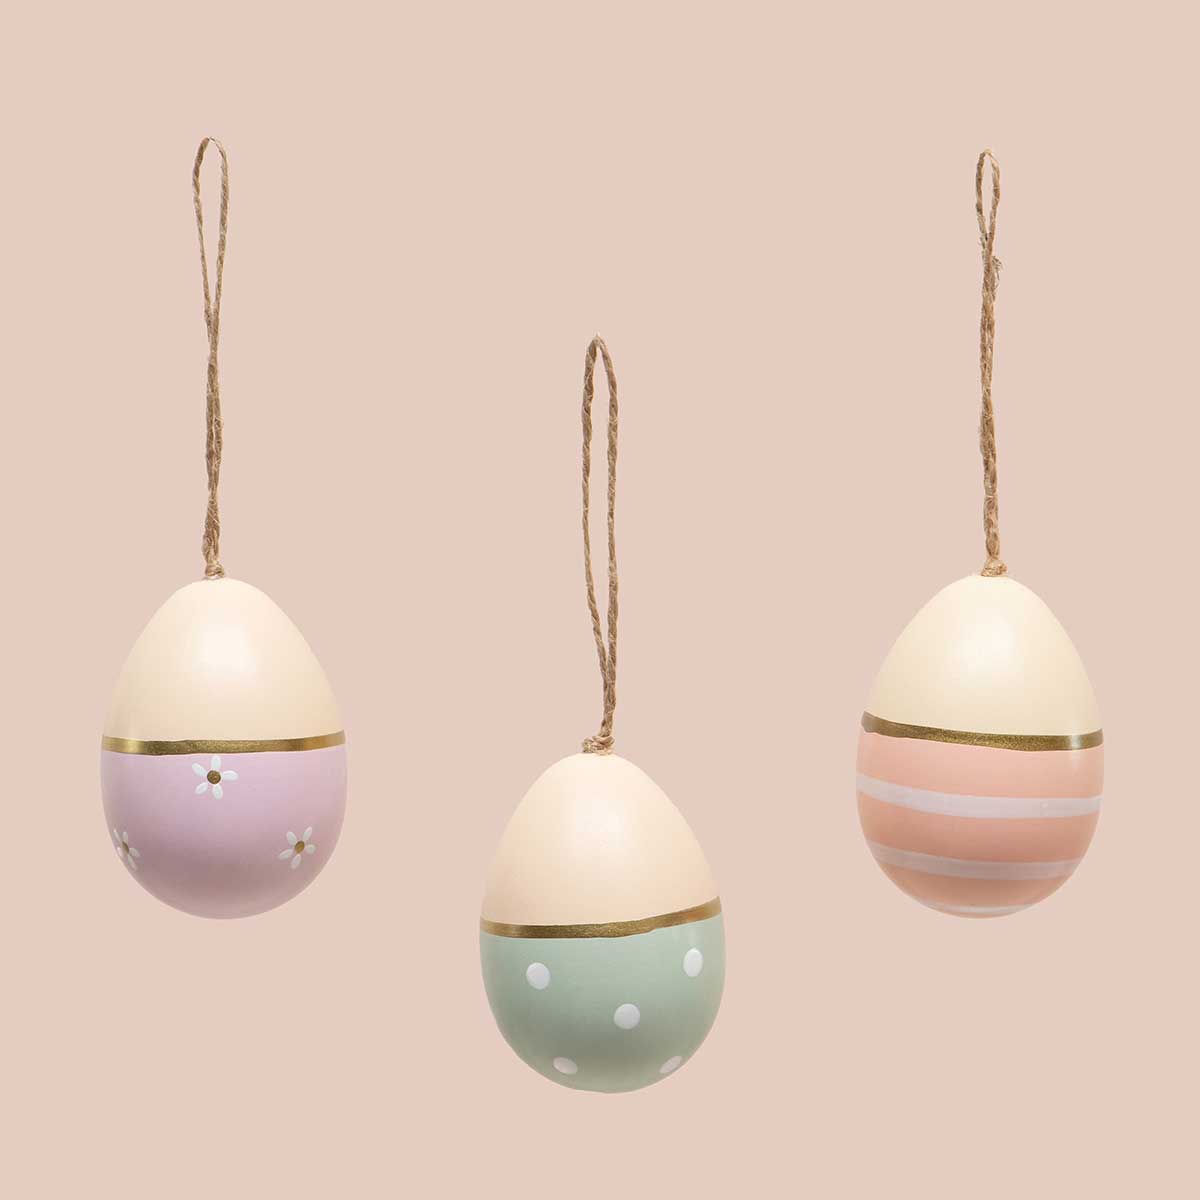 !Egg Ornament with Twine Hanger 3 Assorted